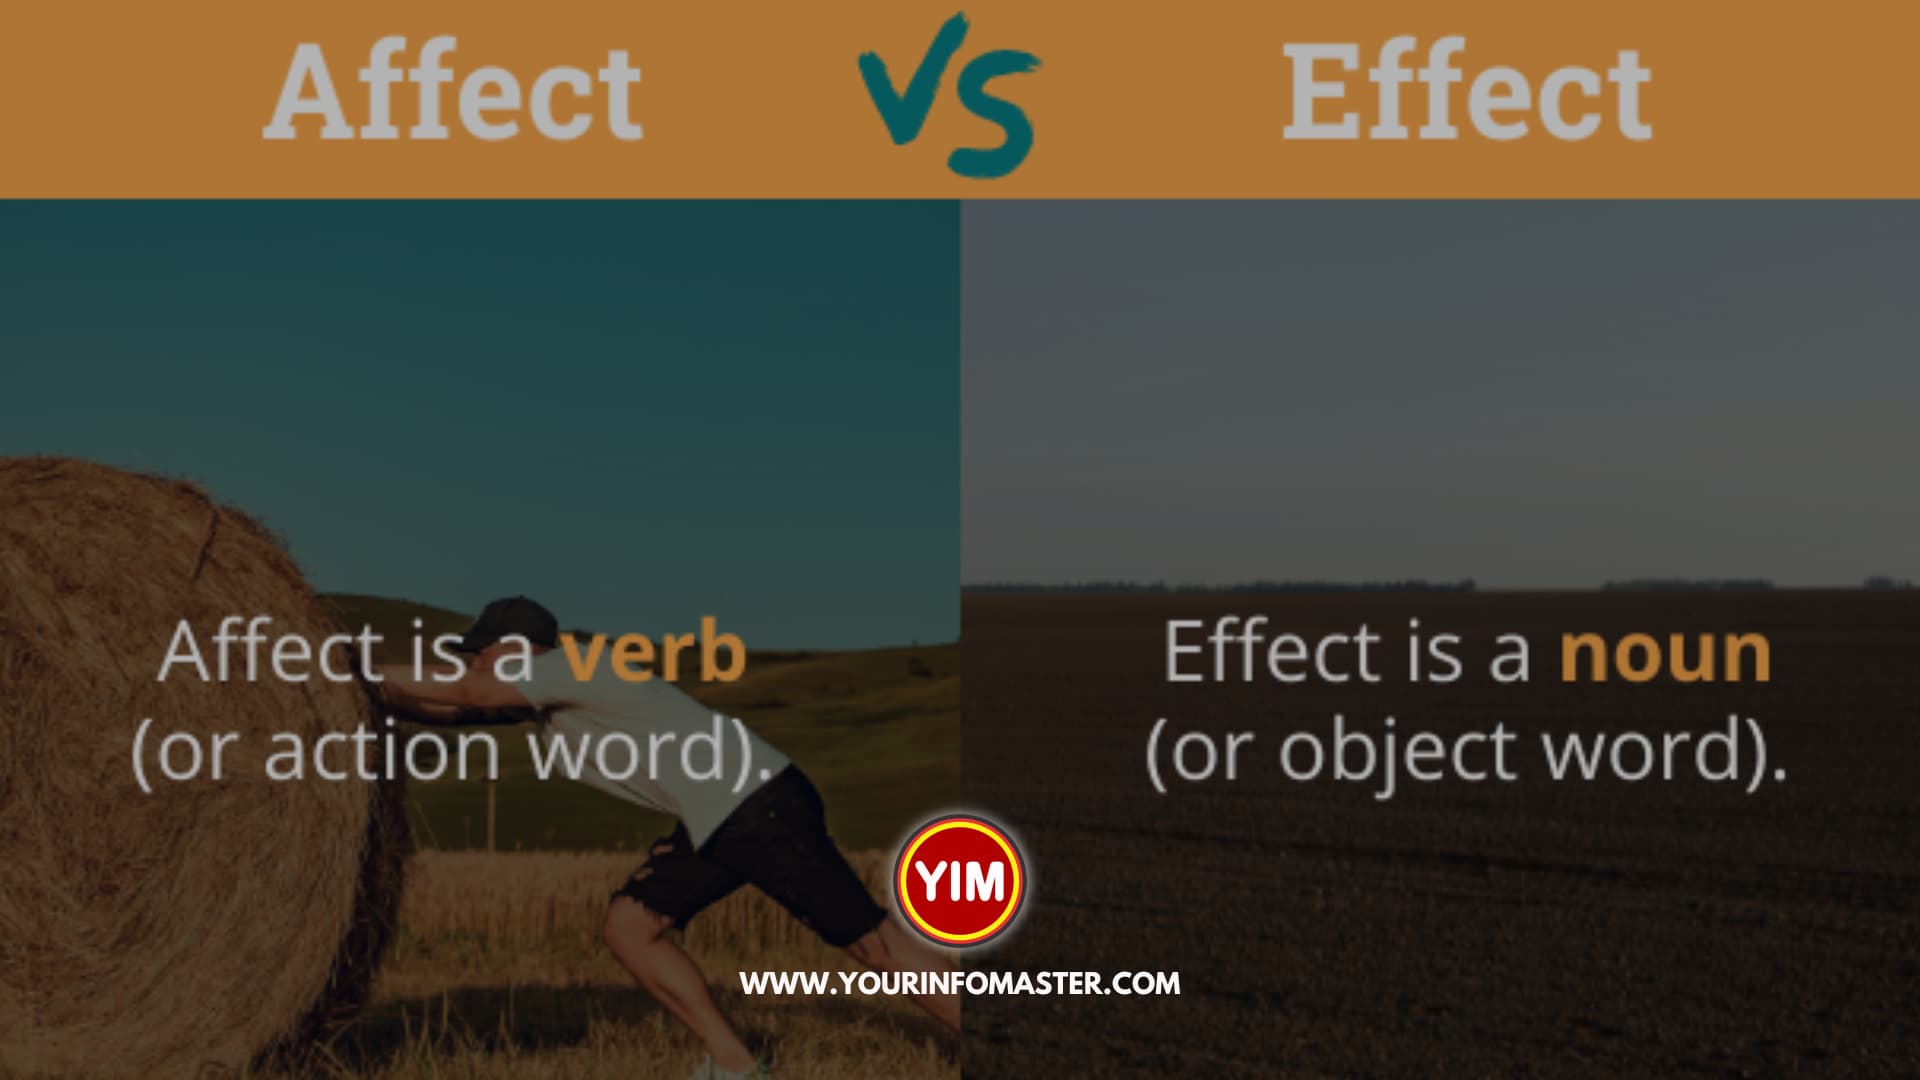 What is the difference between affect and effect?